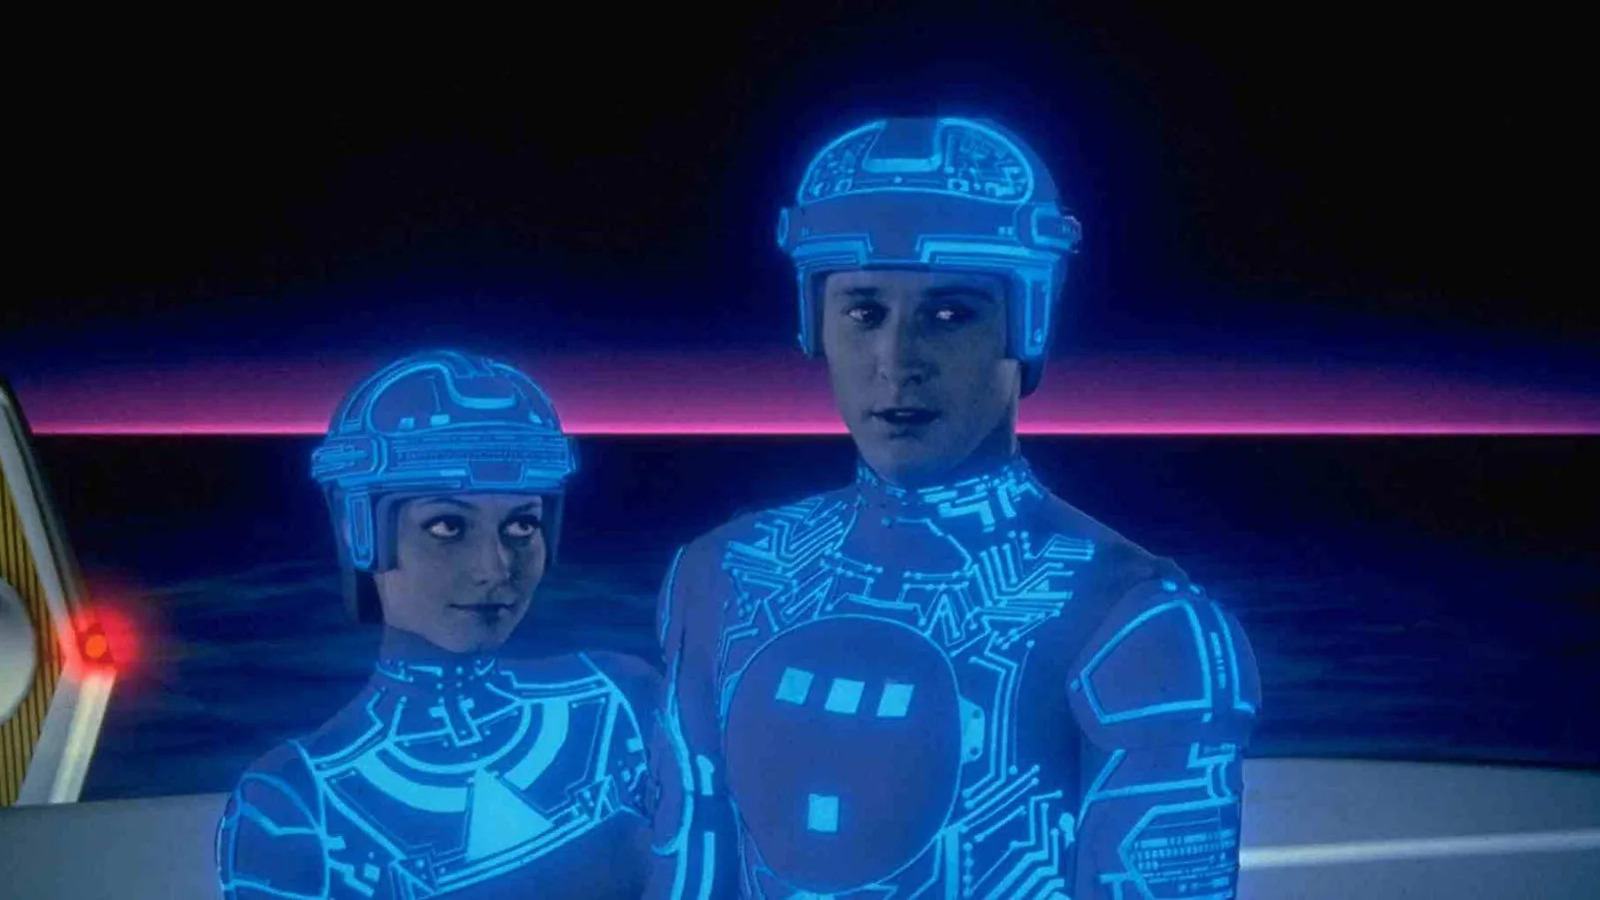 Where to watch Tron and Tron: Legacy to prepare for Tron: Ares